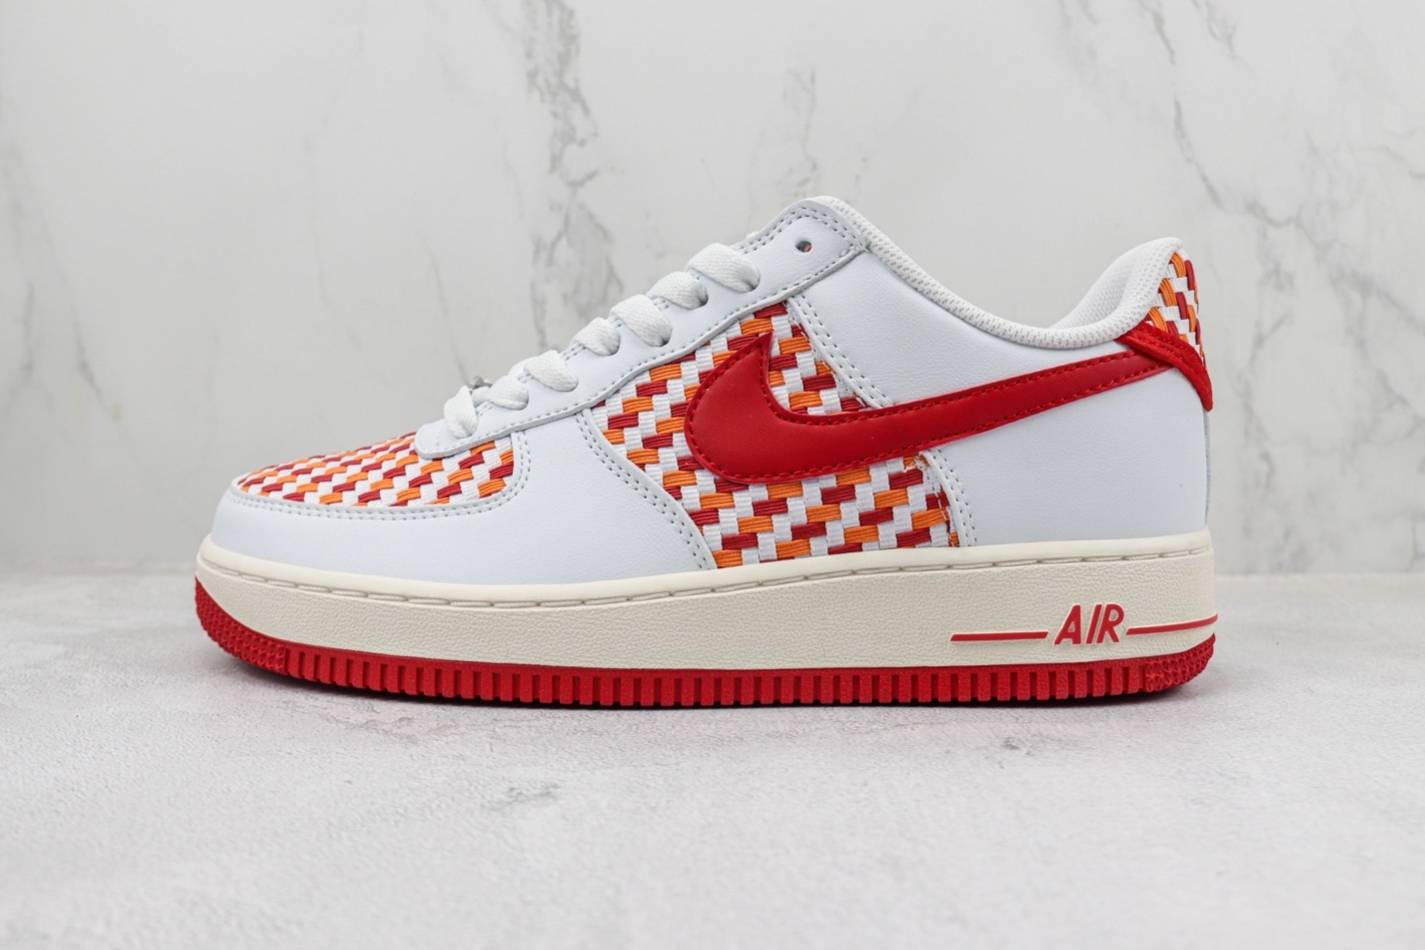 Nike Air Force 1 07 Low White Red Orange DM1060-161 - Trendy Sneakers for Fashion-Forward Enthusiasts